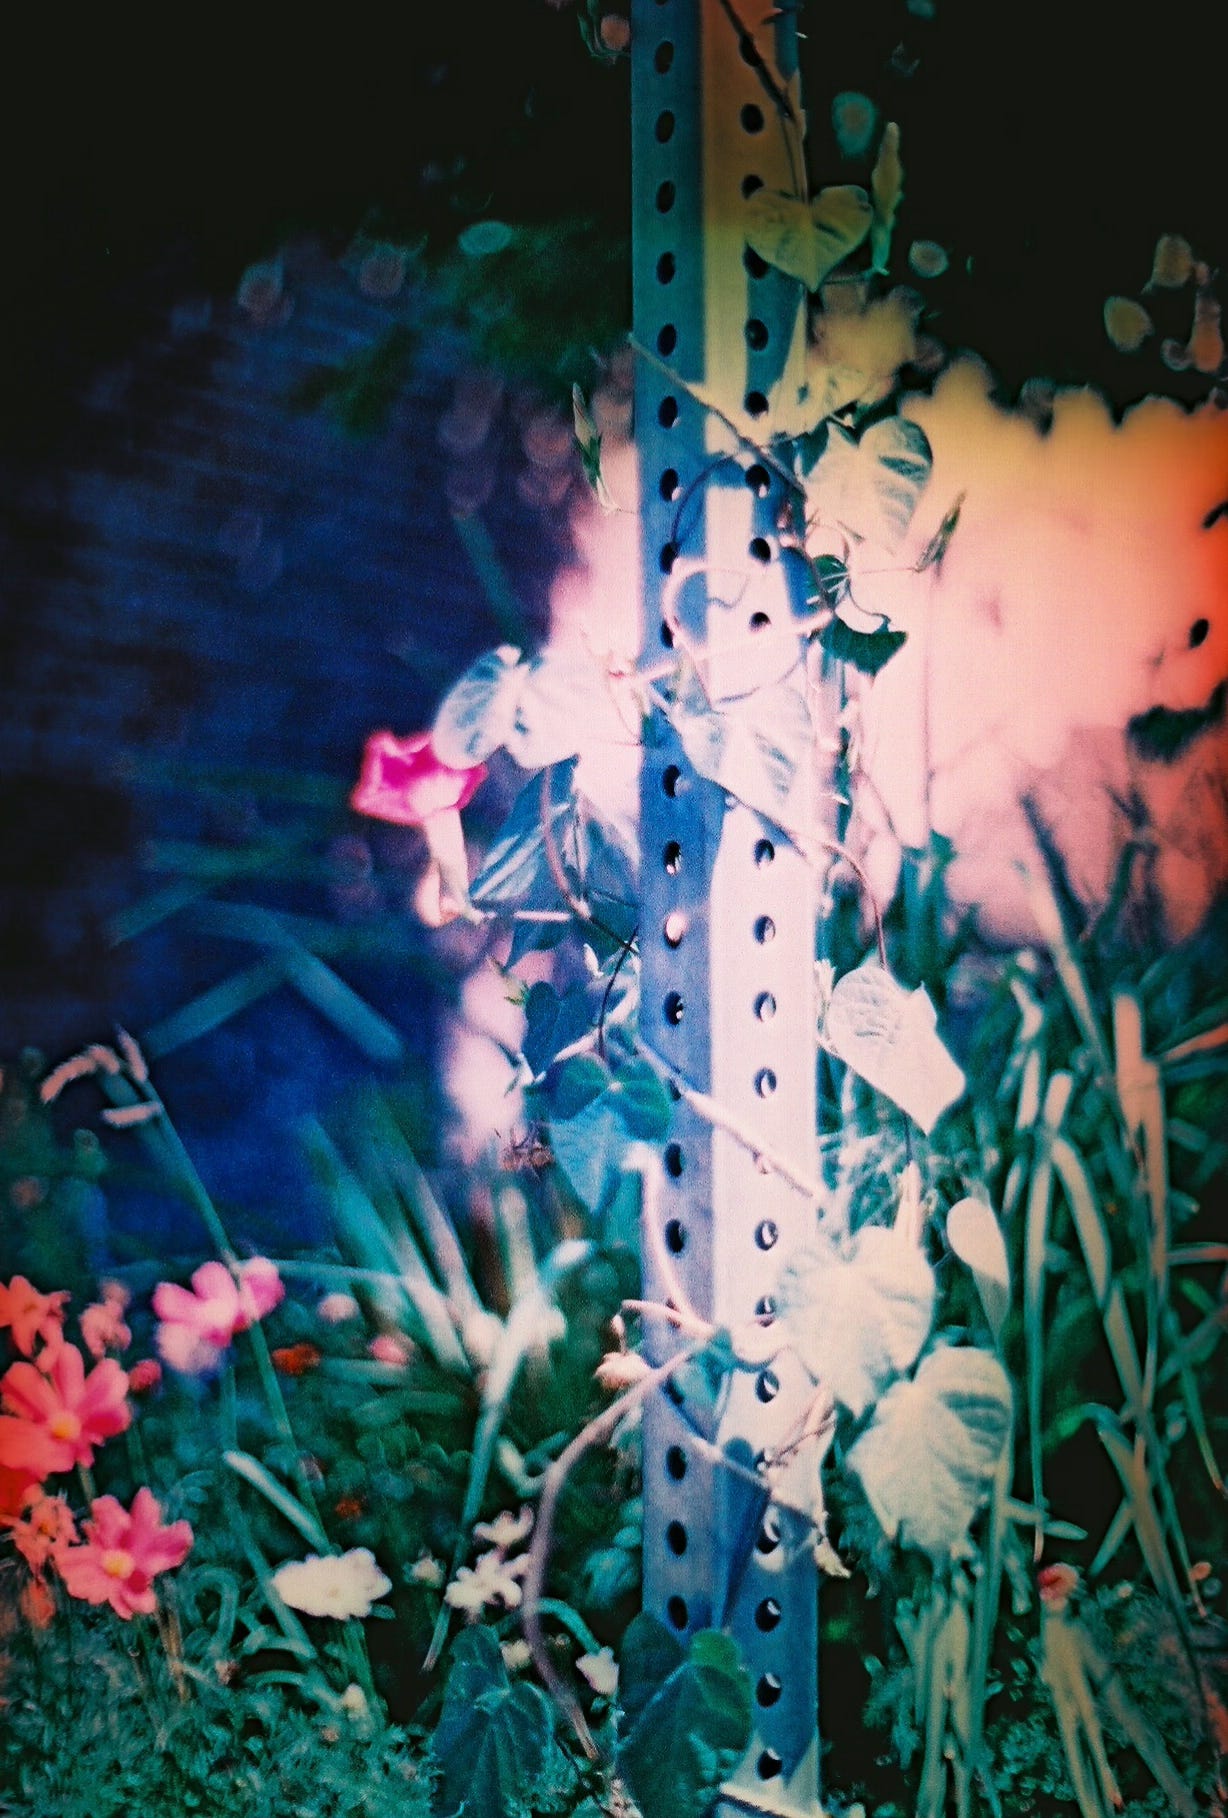 Flowering vines climb a metal pole in a cross-processed film photo.